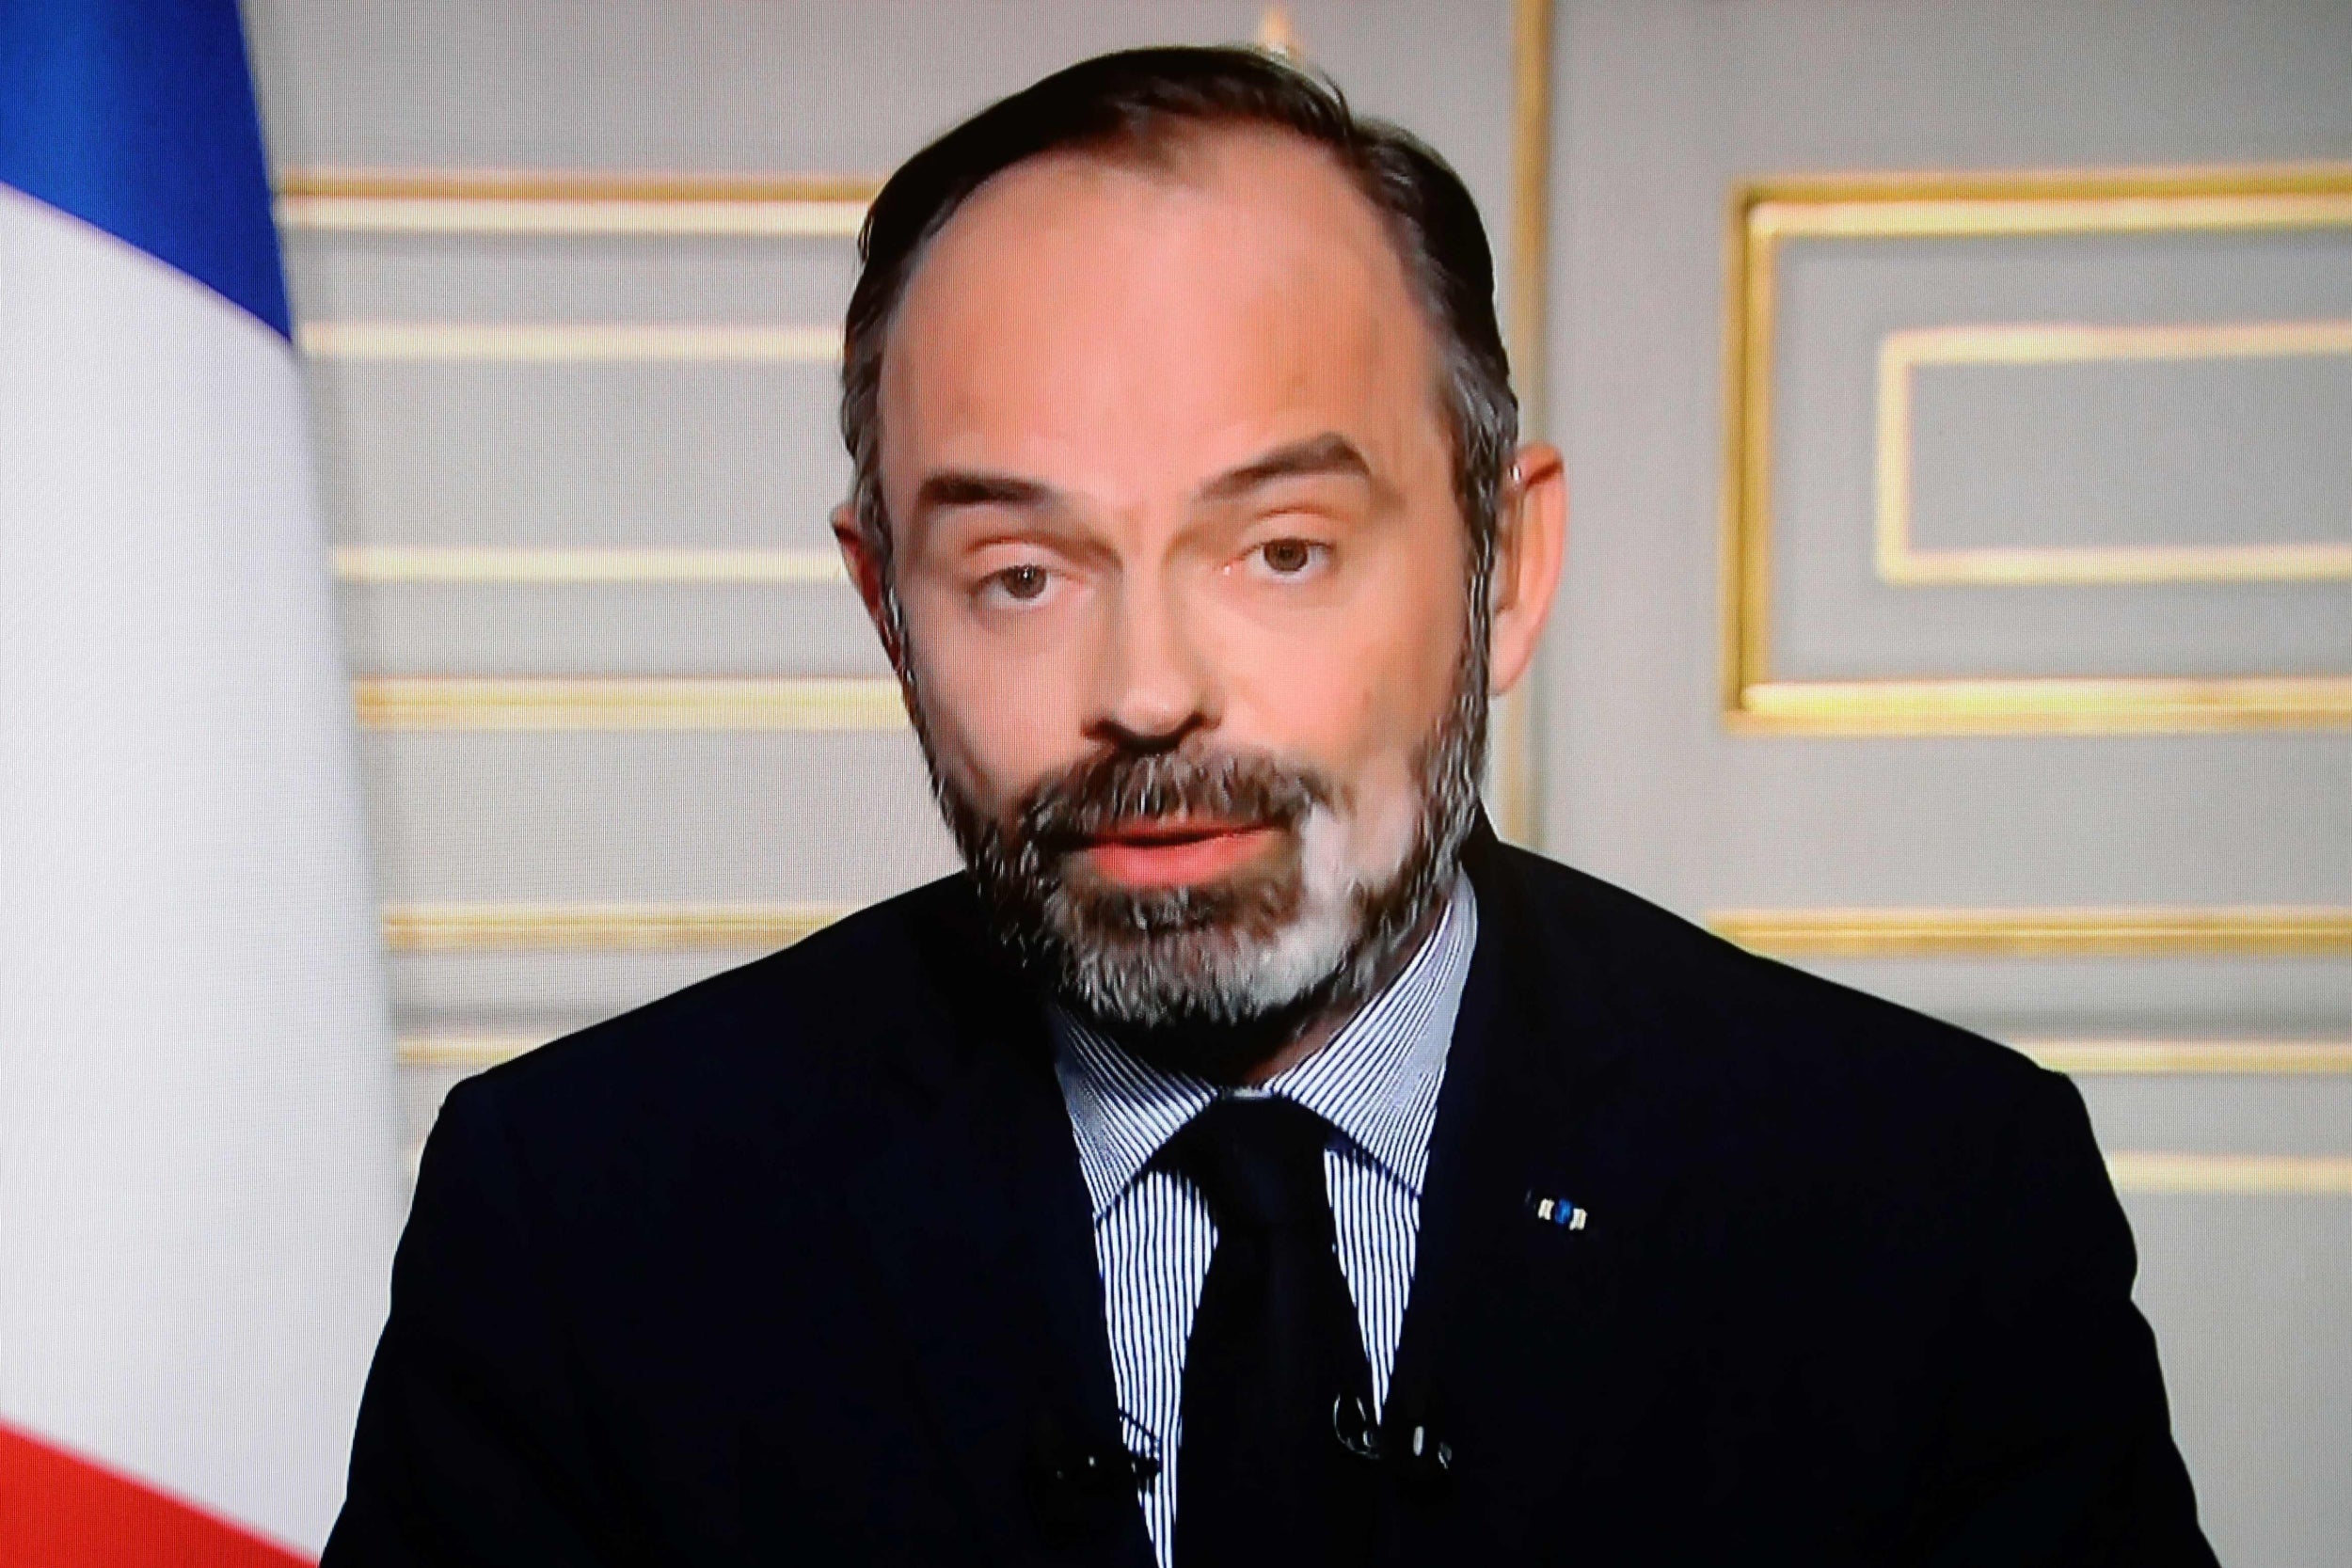 French Prime Minister Edouard Philippe issued the warning in a televised address to the nation